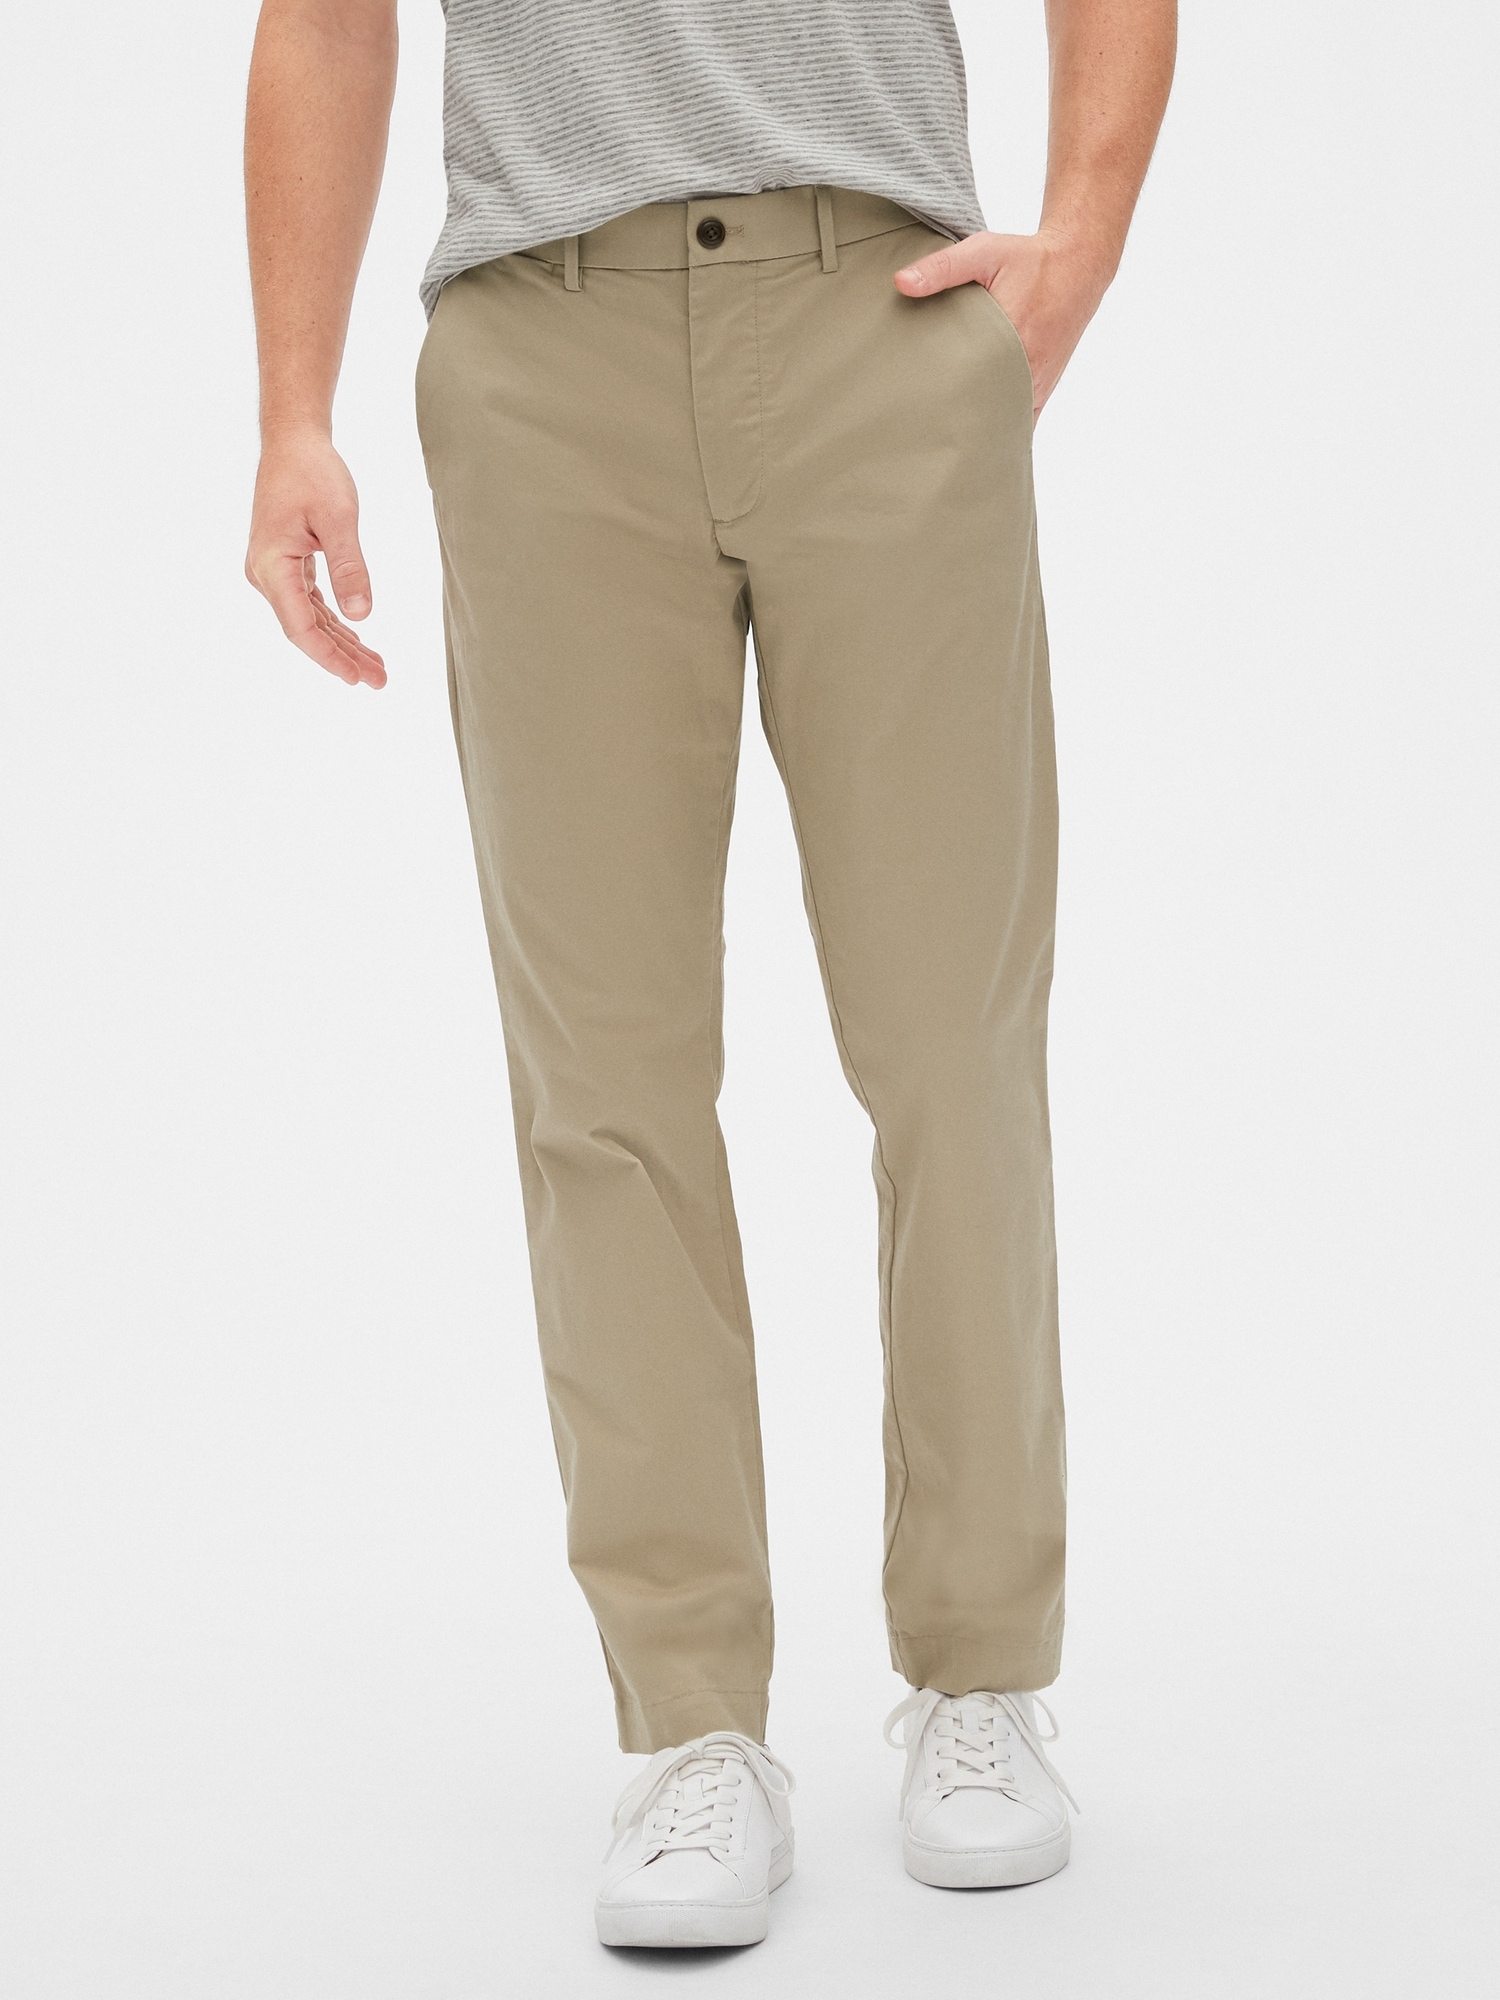 Modern Khakis in Straight Fit with GapFlex | Gap